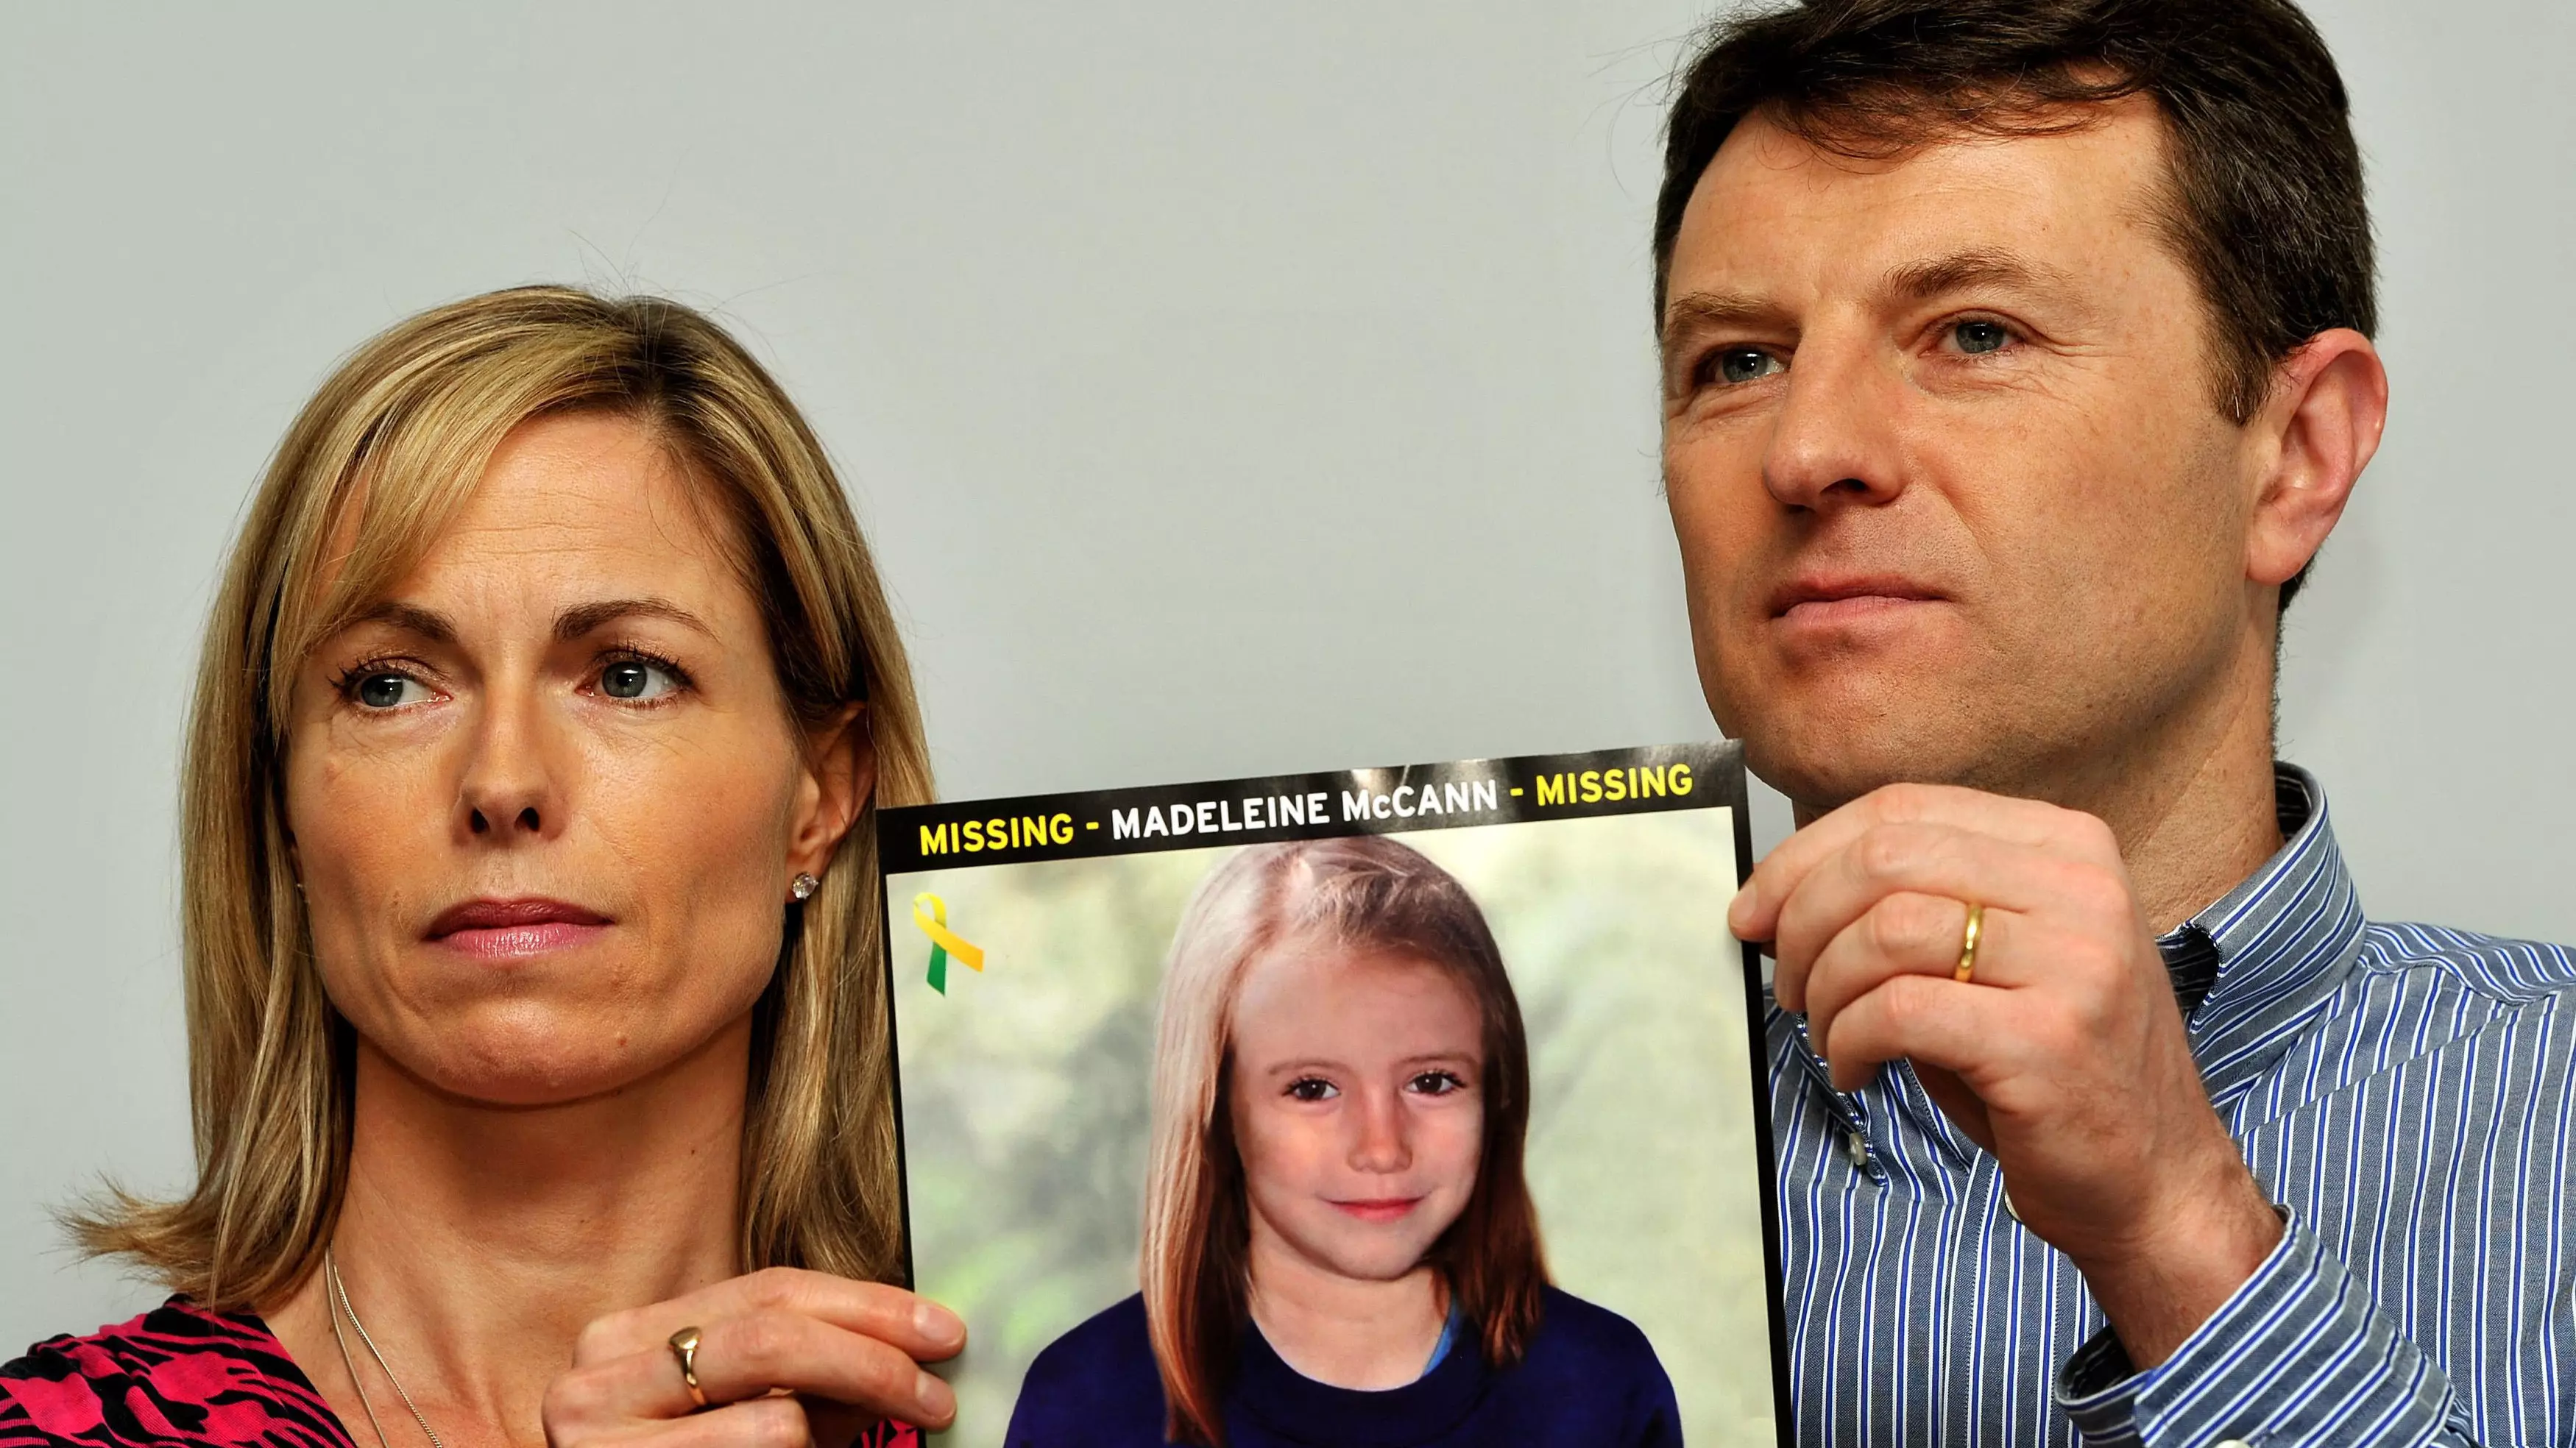 Police Investigating Madeleine McCann Disappearance Given More Funding 